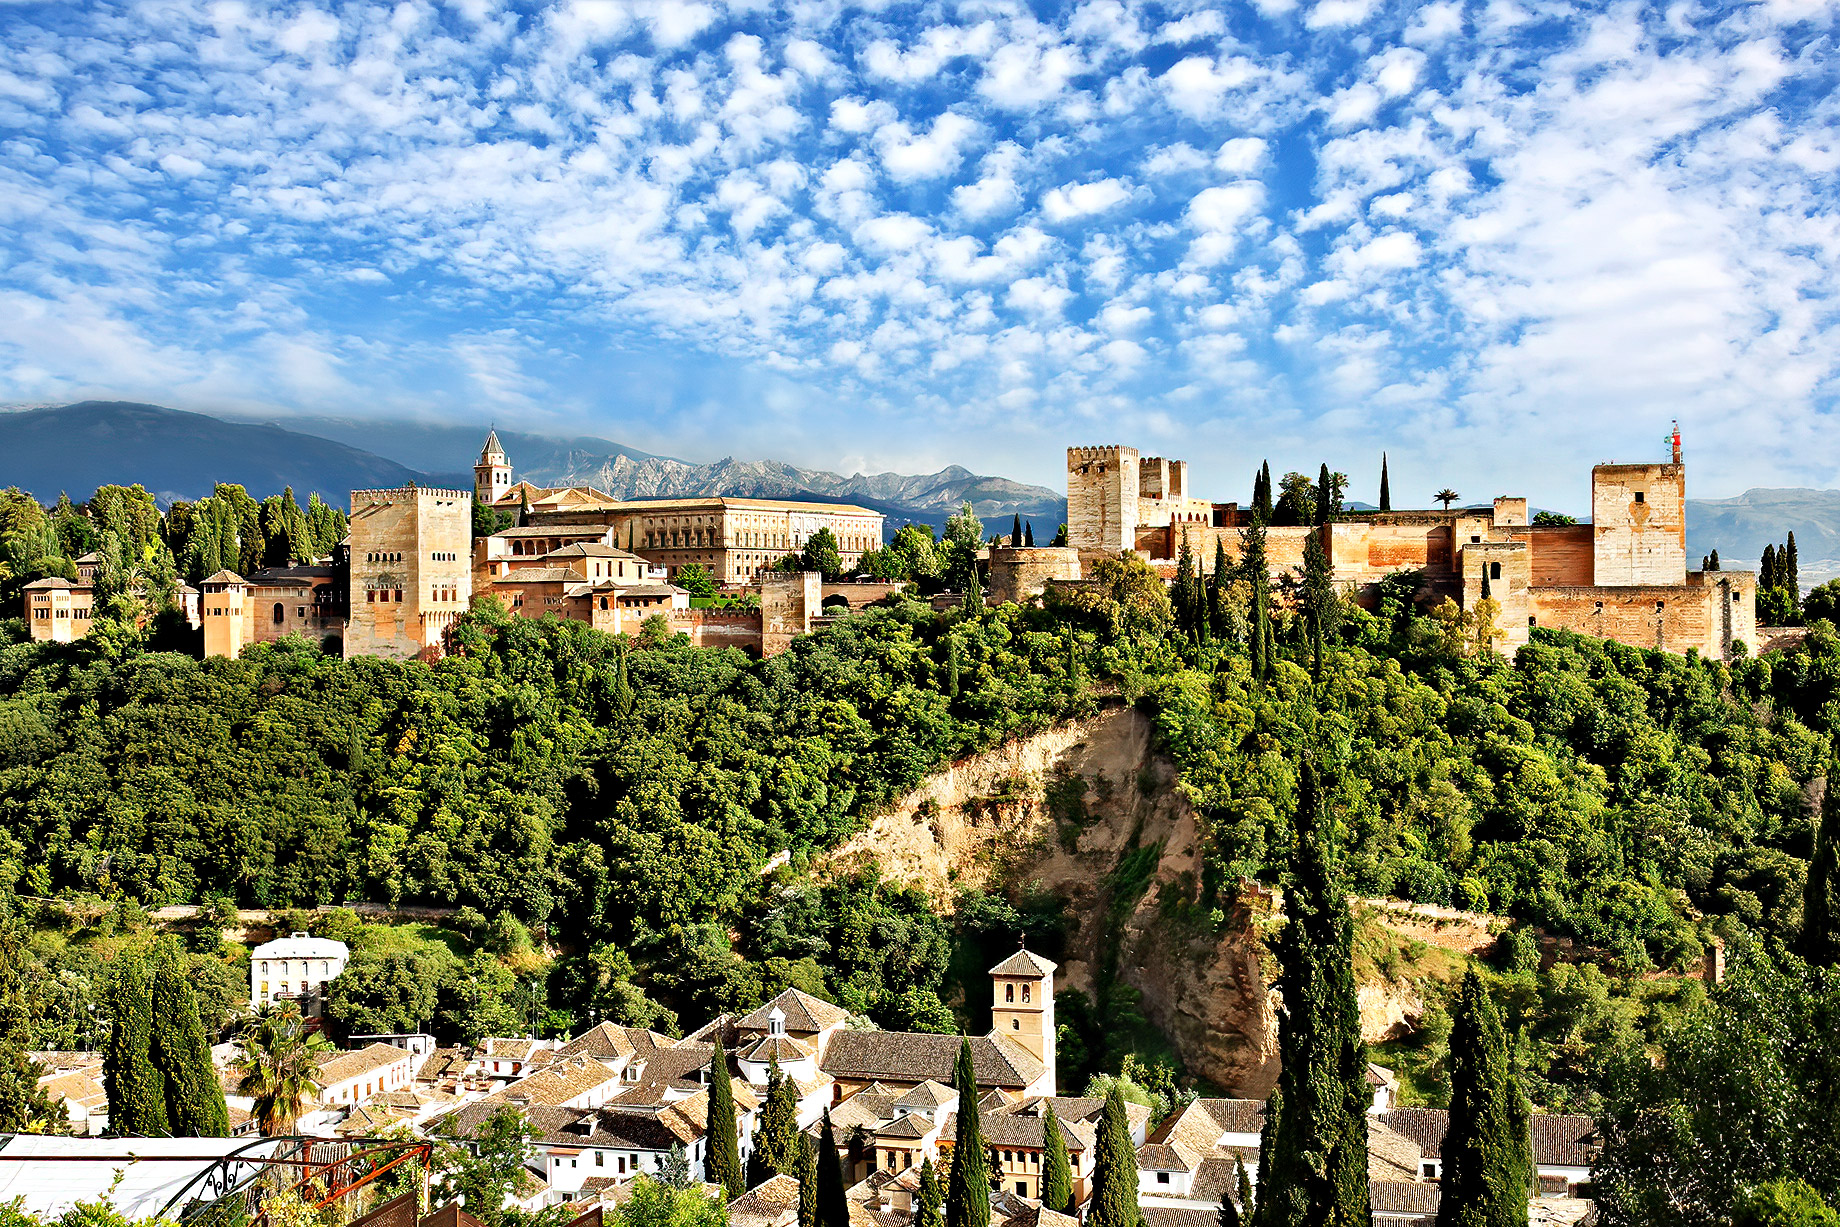 Alhambra Palace and Fortress Complex - Granada, Spain